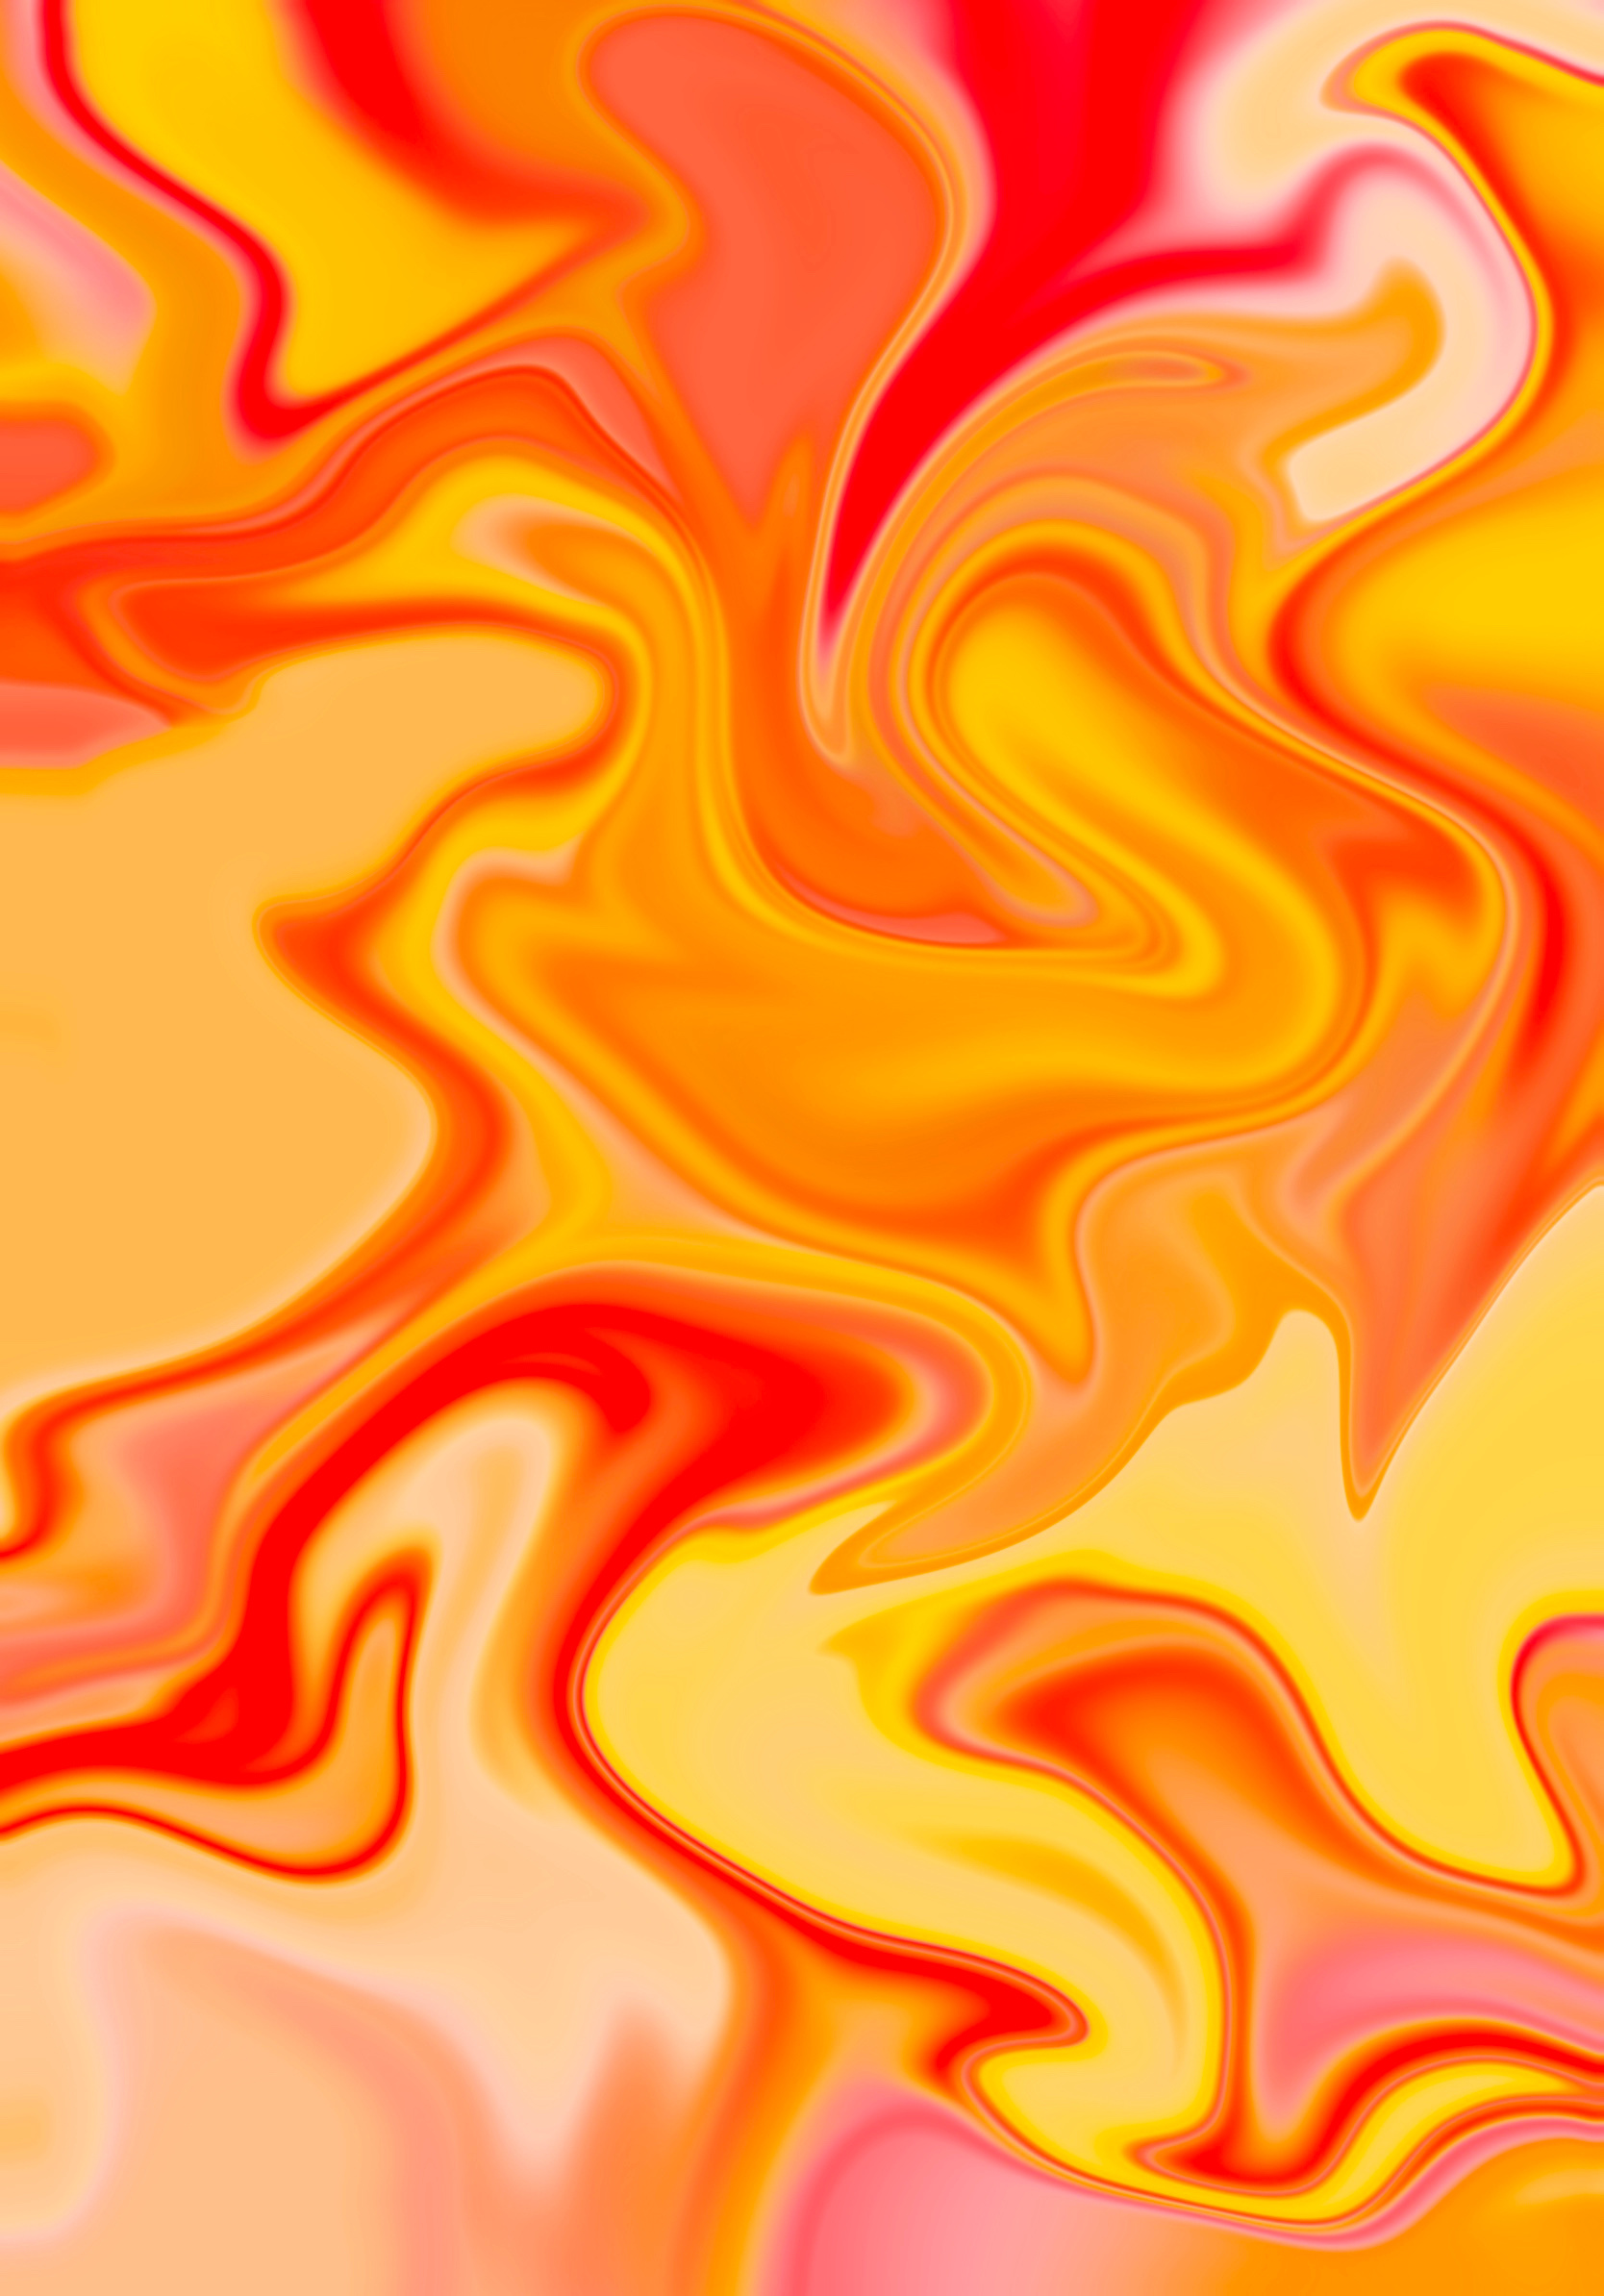 Red and yellow abstract liquid background